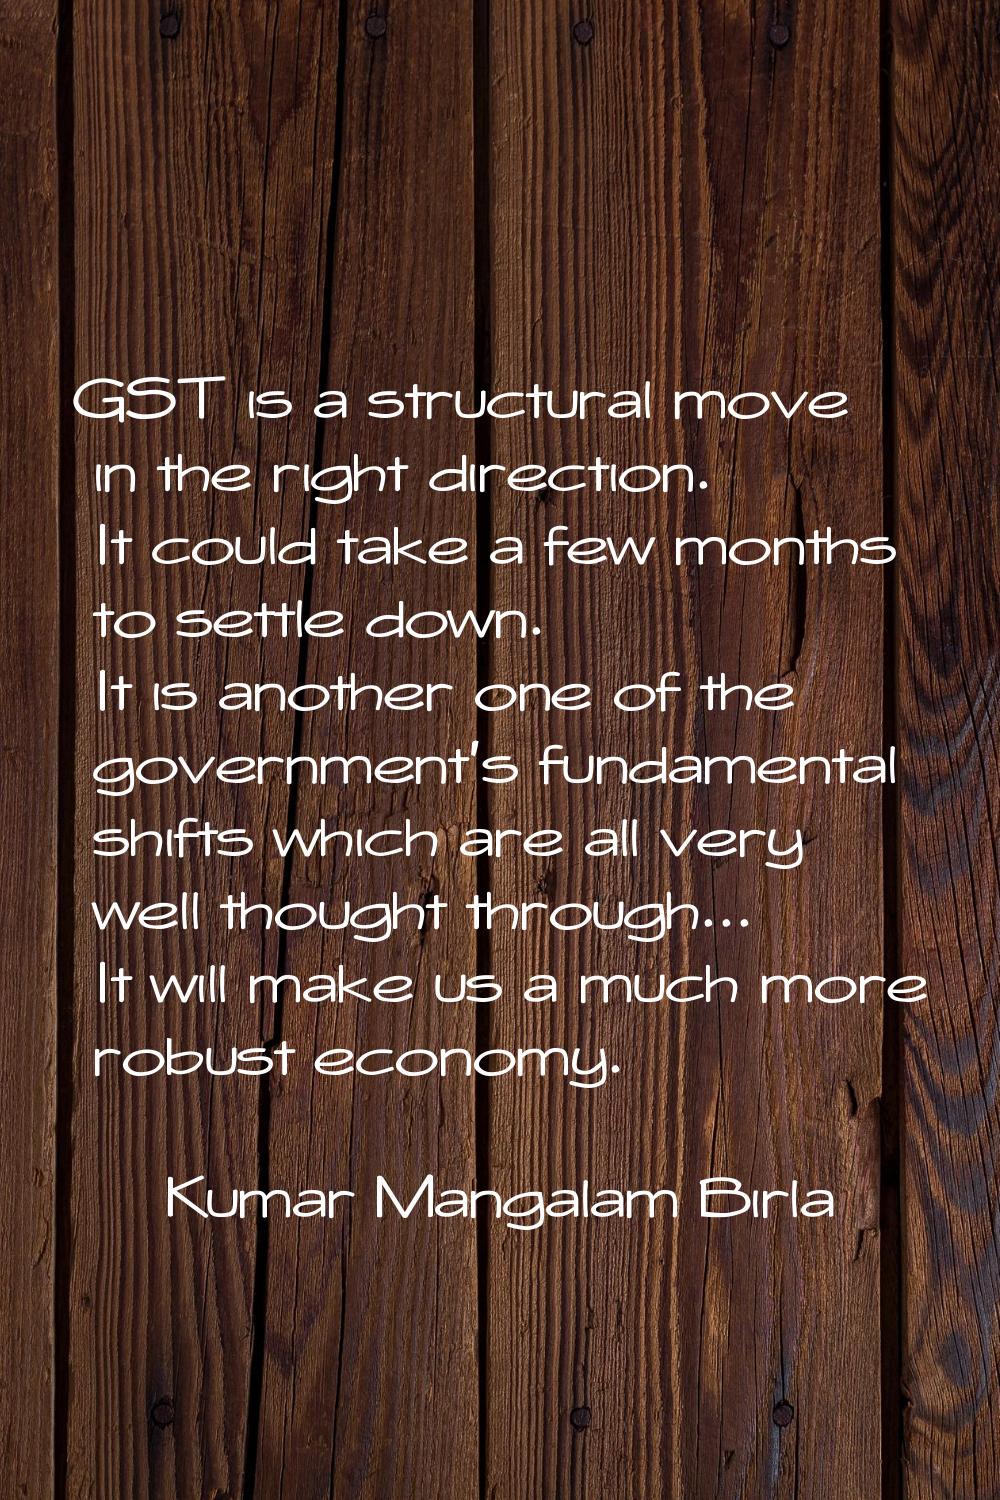 GST is a structural move in the right direction. It could take a few months to settle down. It is a